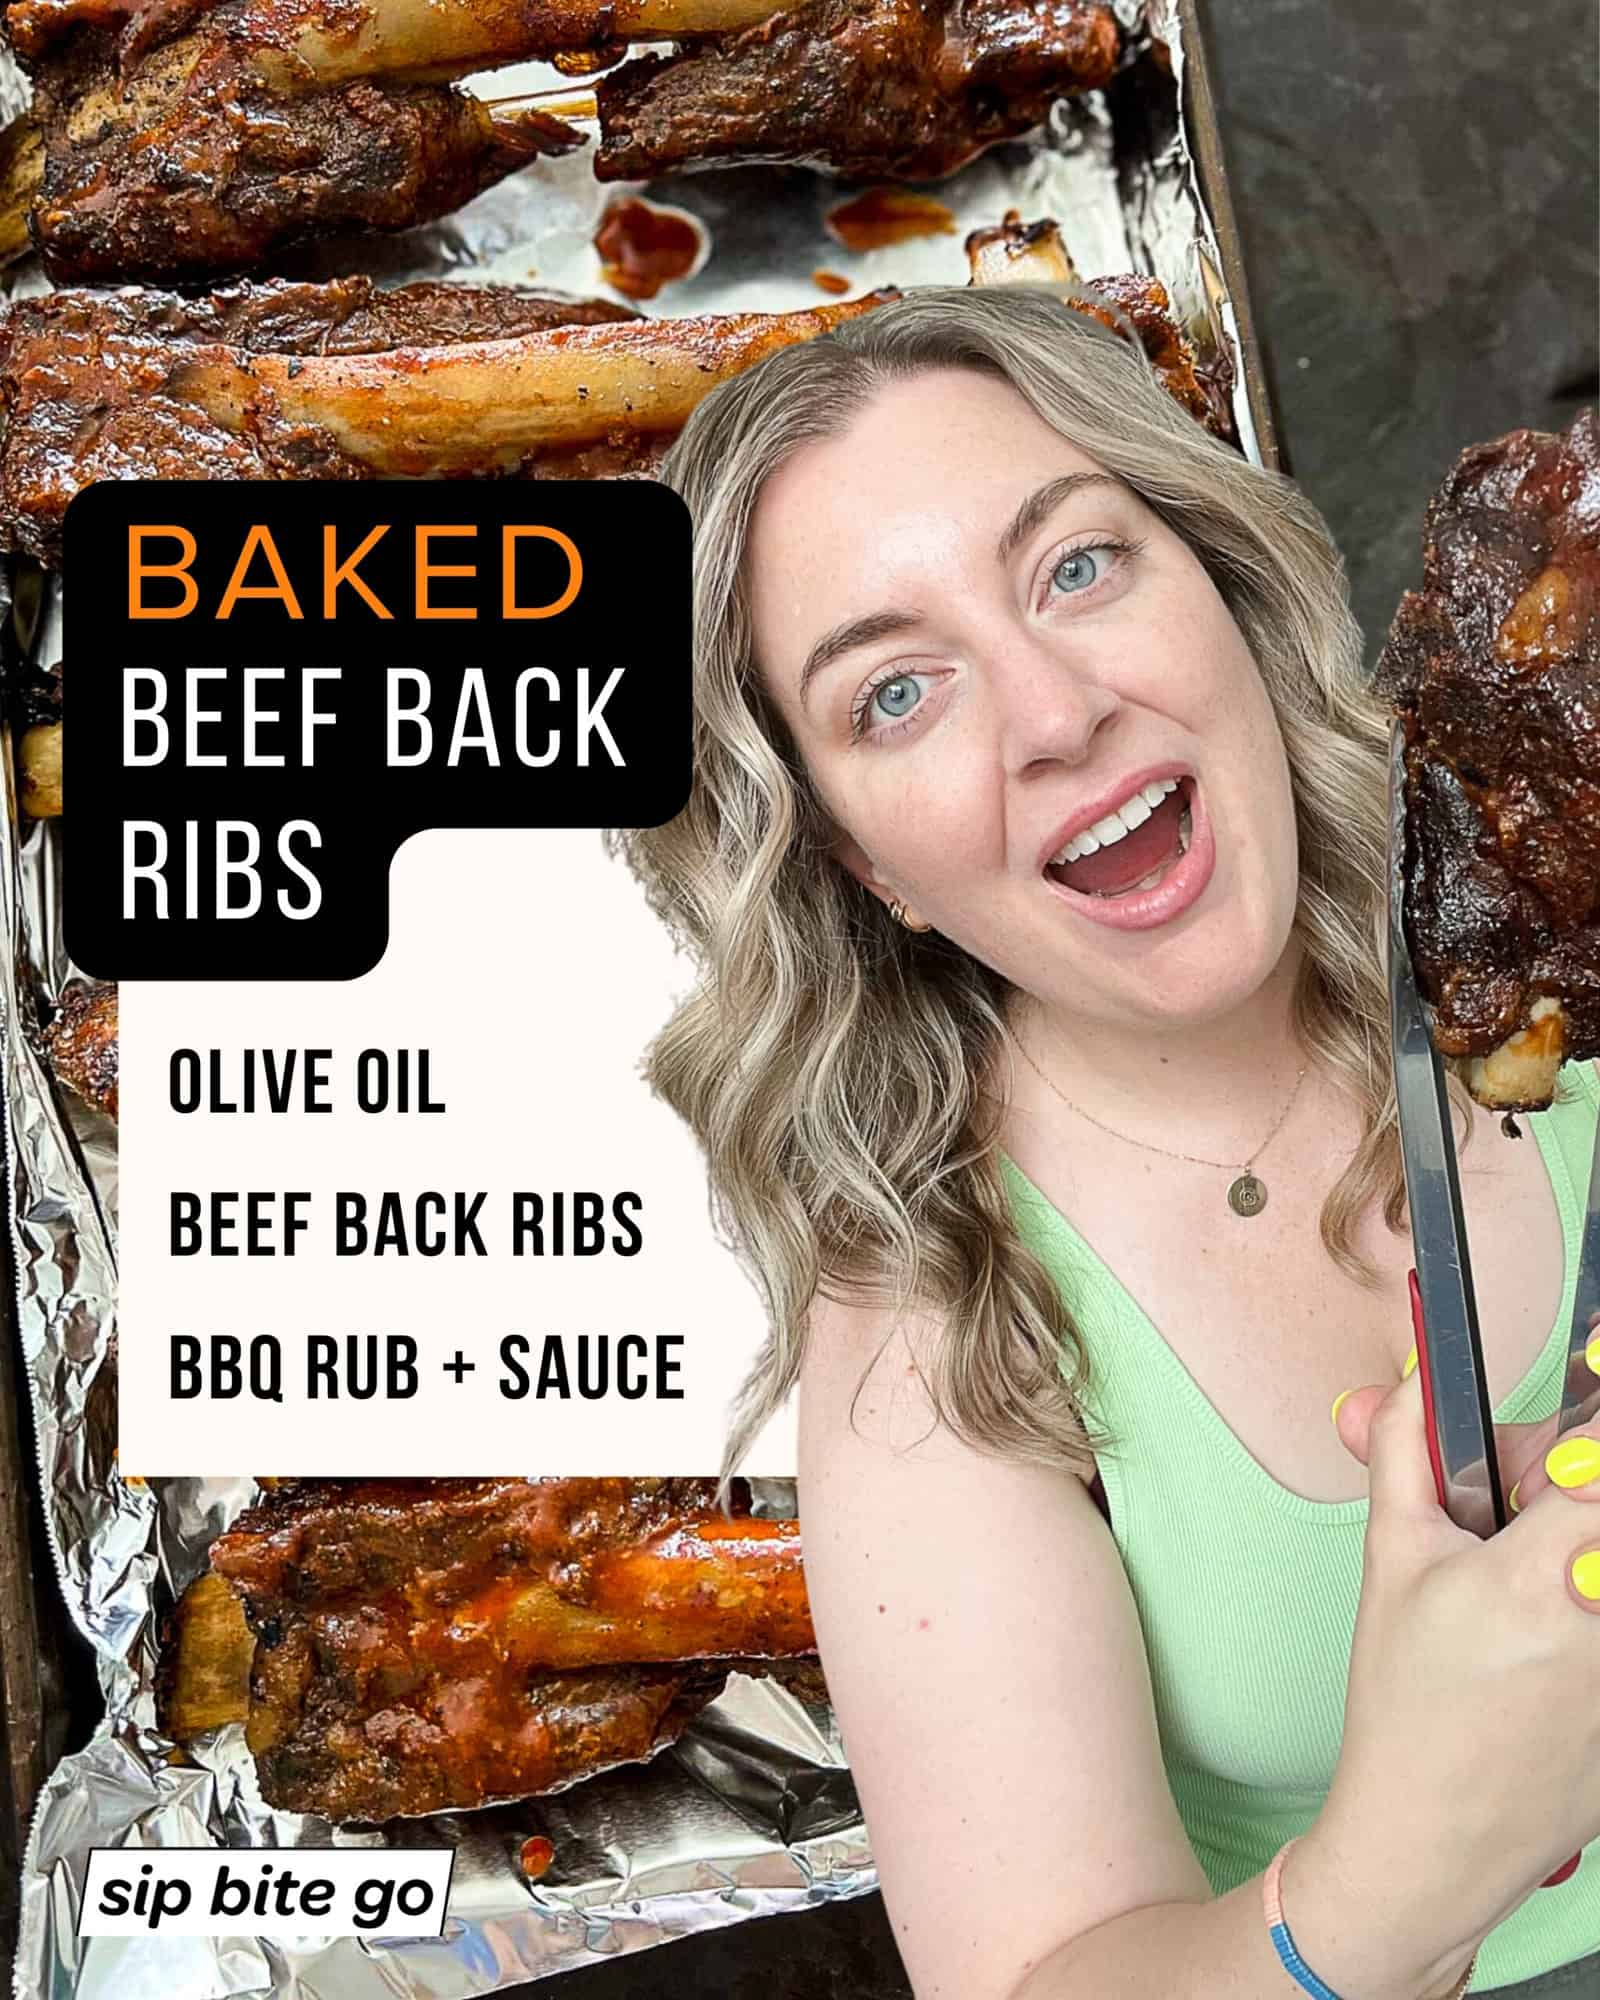 Infographic demonstrating ingredients for BBQ baked beef back ribs in the oven